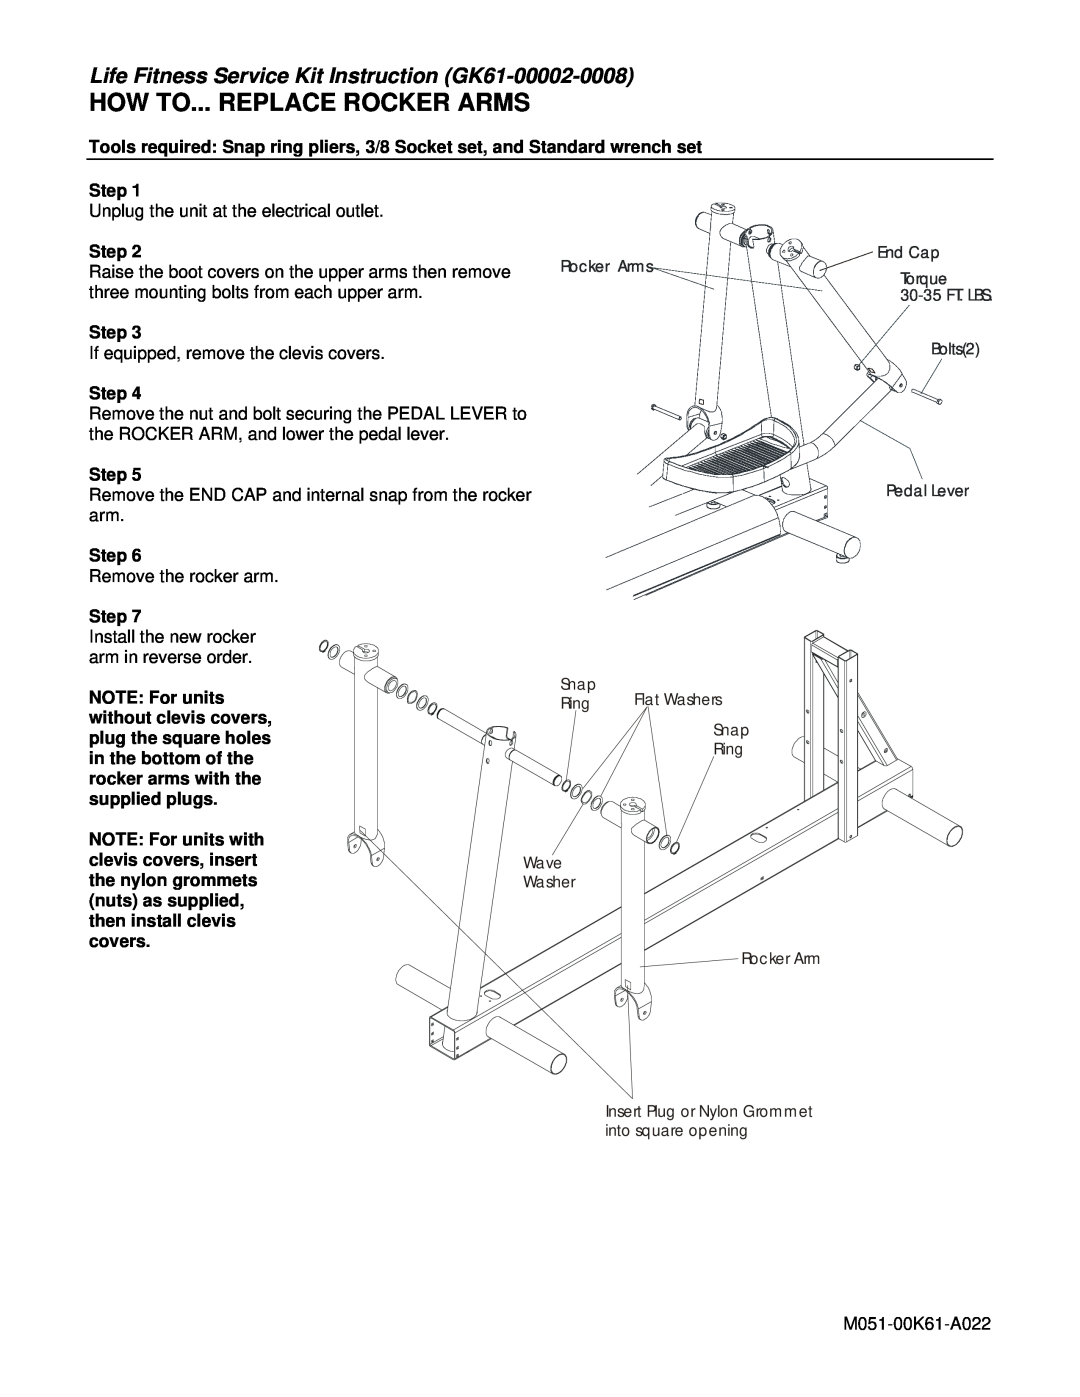 Life Fitness manual How To... Replace Rocker Arms, Life Fitness Service Kit Instruction GK61-00002-0008 